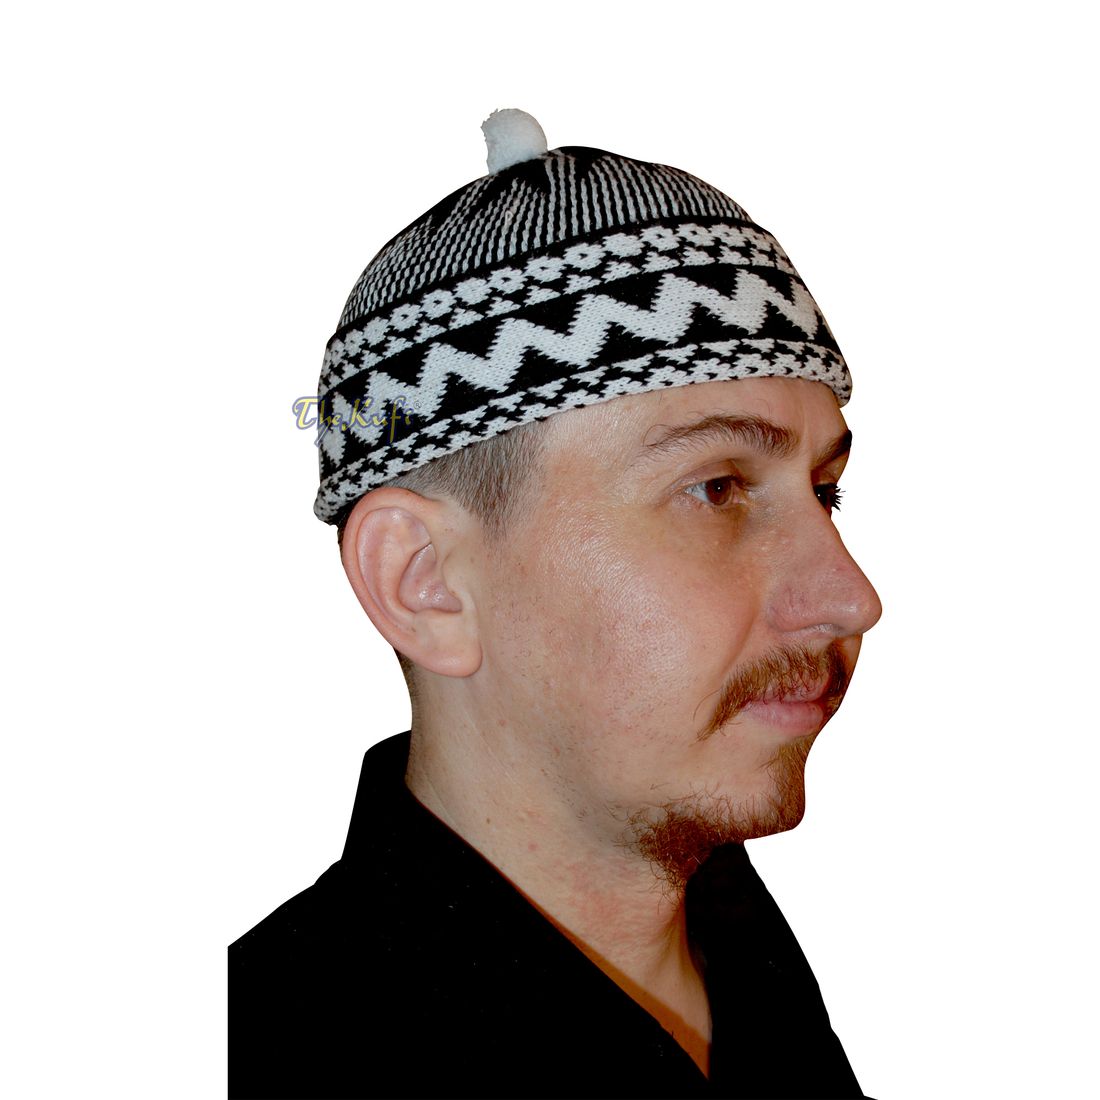 Black Cotton Blend Zigzag Beanie Kufi Hat with Ball on Top